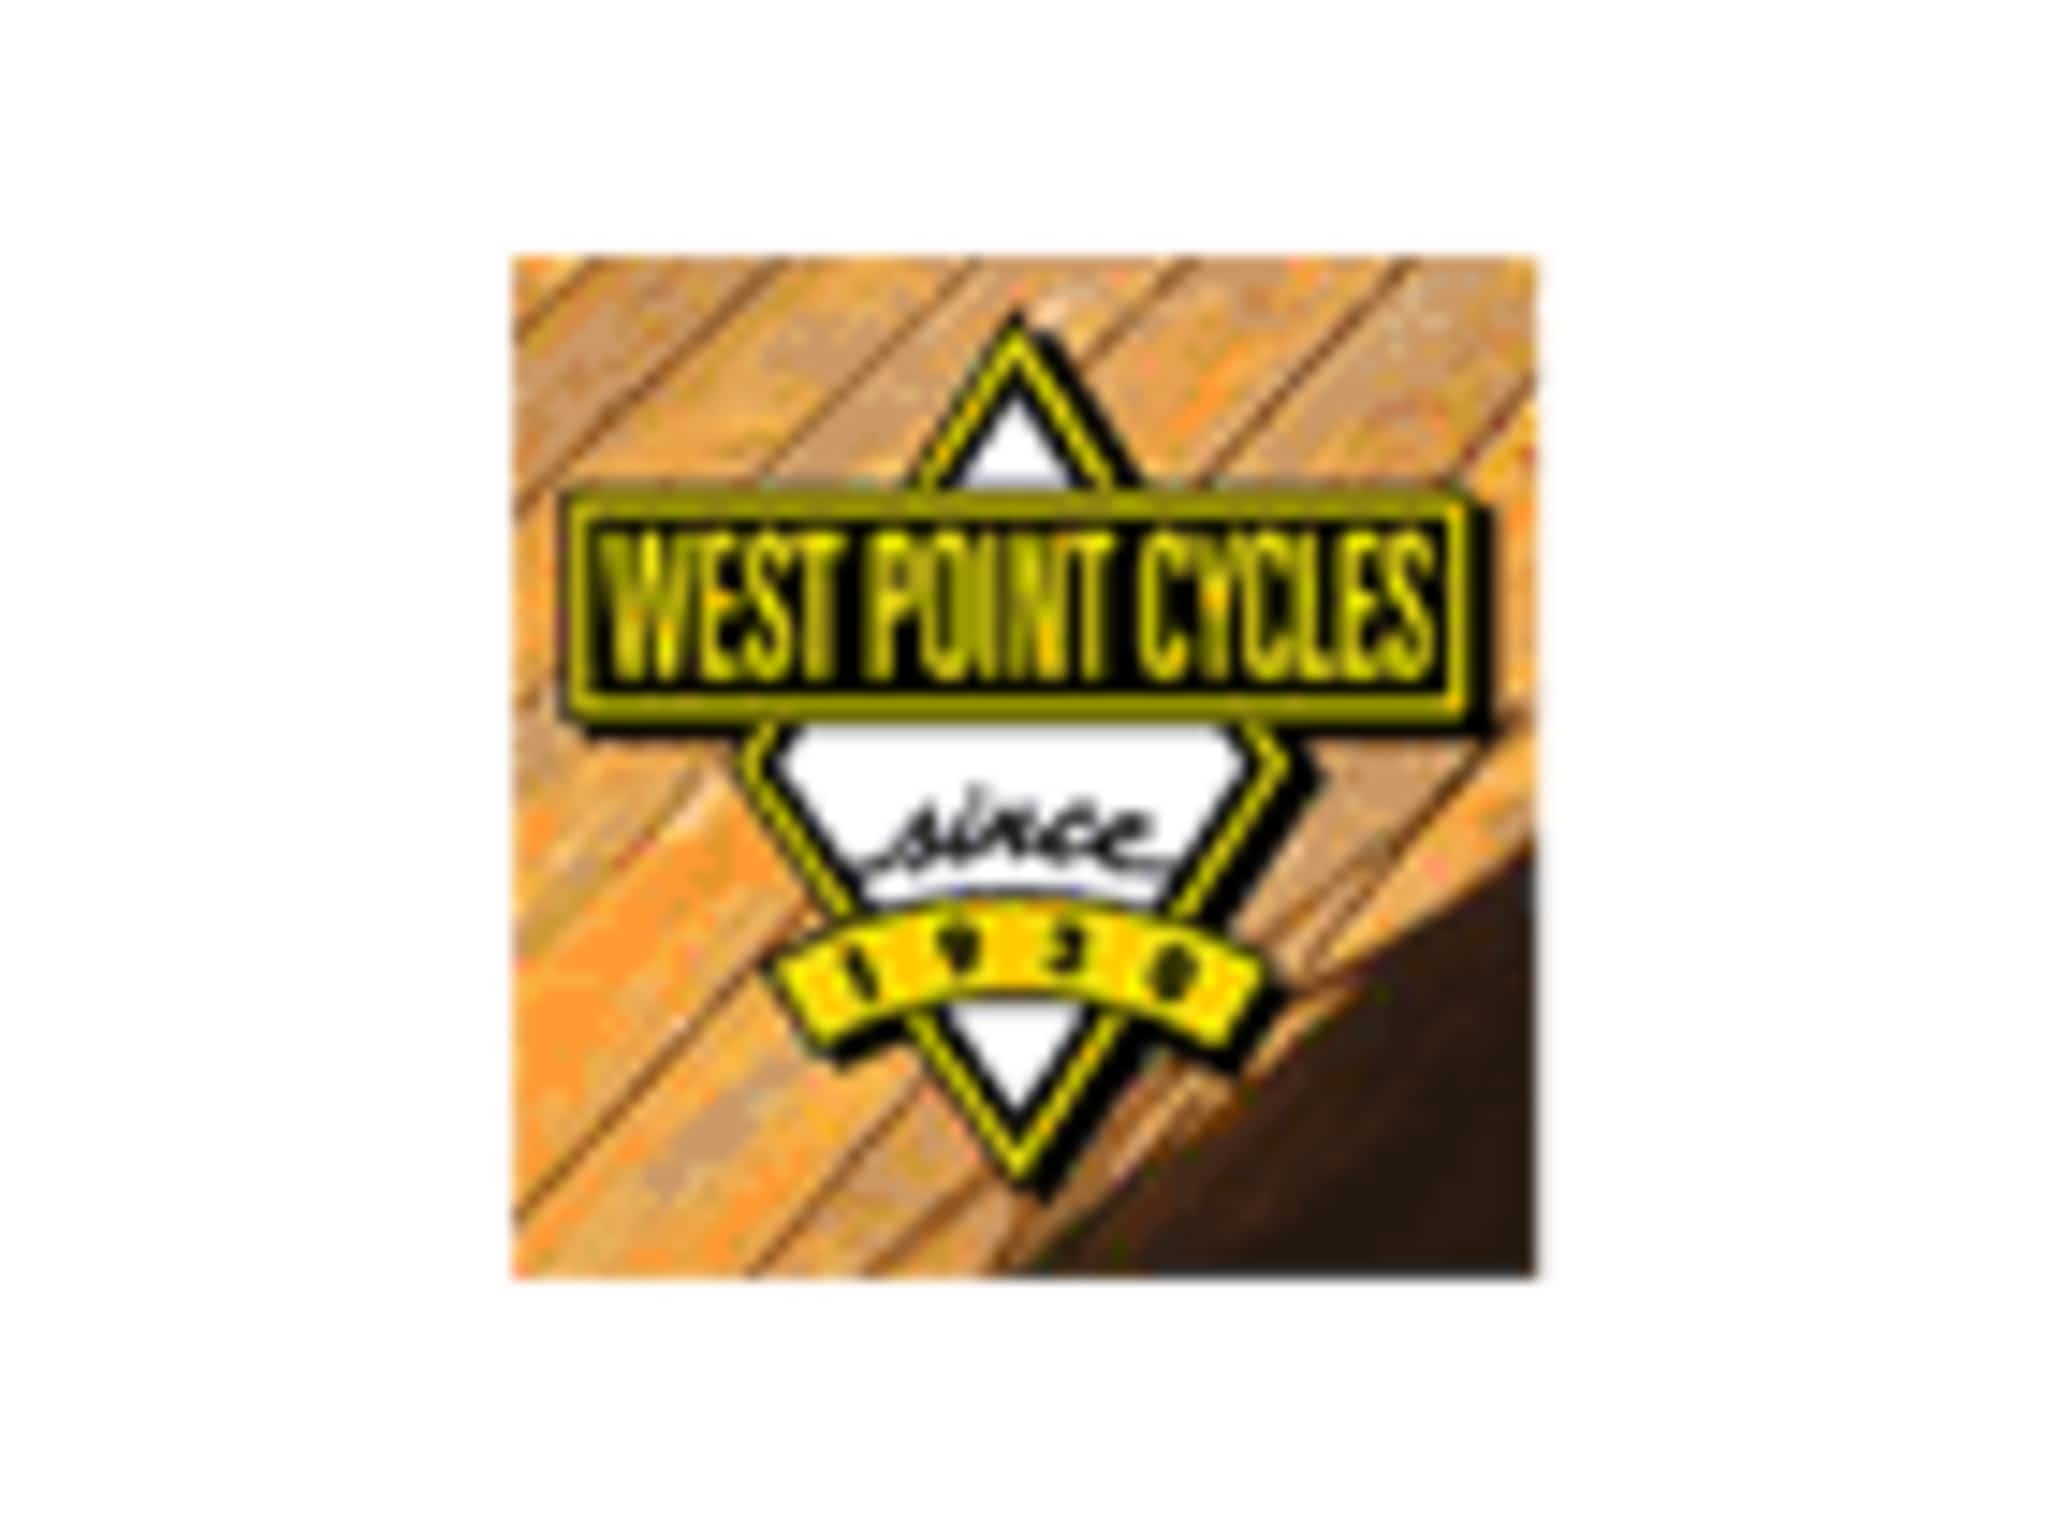 photo West Point Cycles